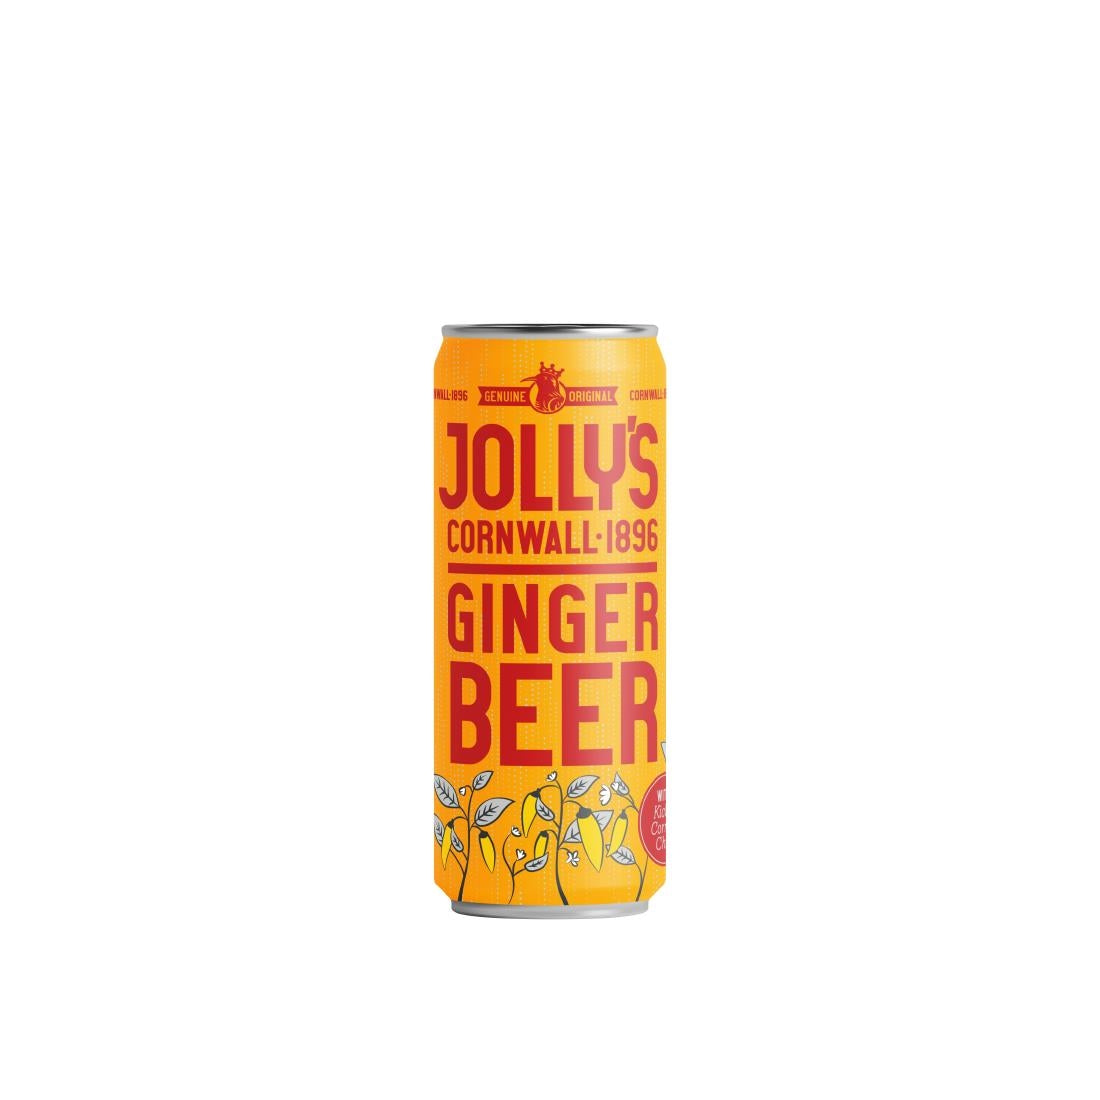 HN943 Jolly's Cornish Ginger Beer Cans 250ml (Pack of 24)